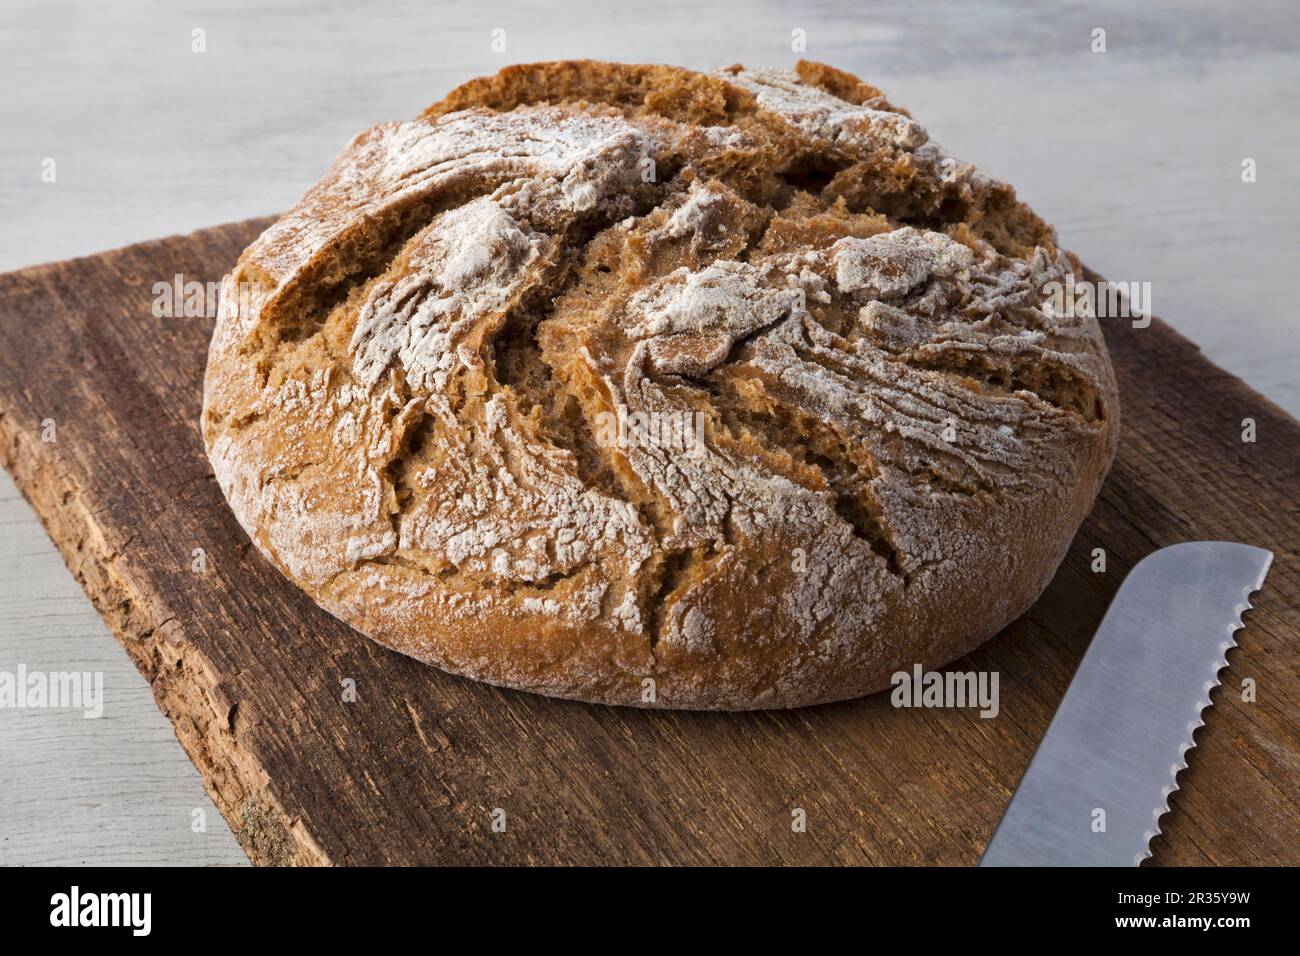 Country bread on a wooden board with a bread knife Stock Photo